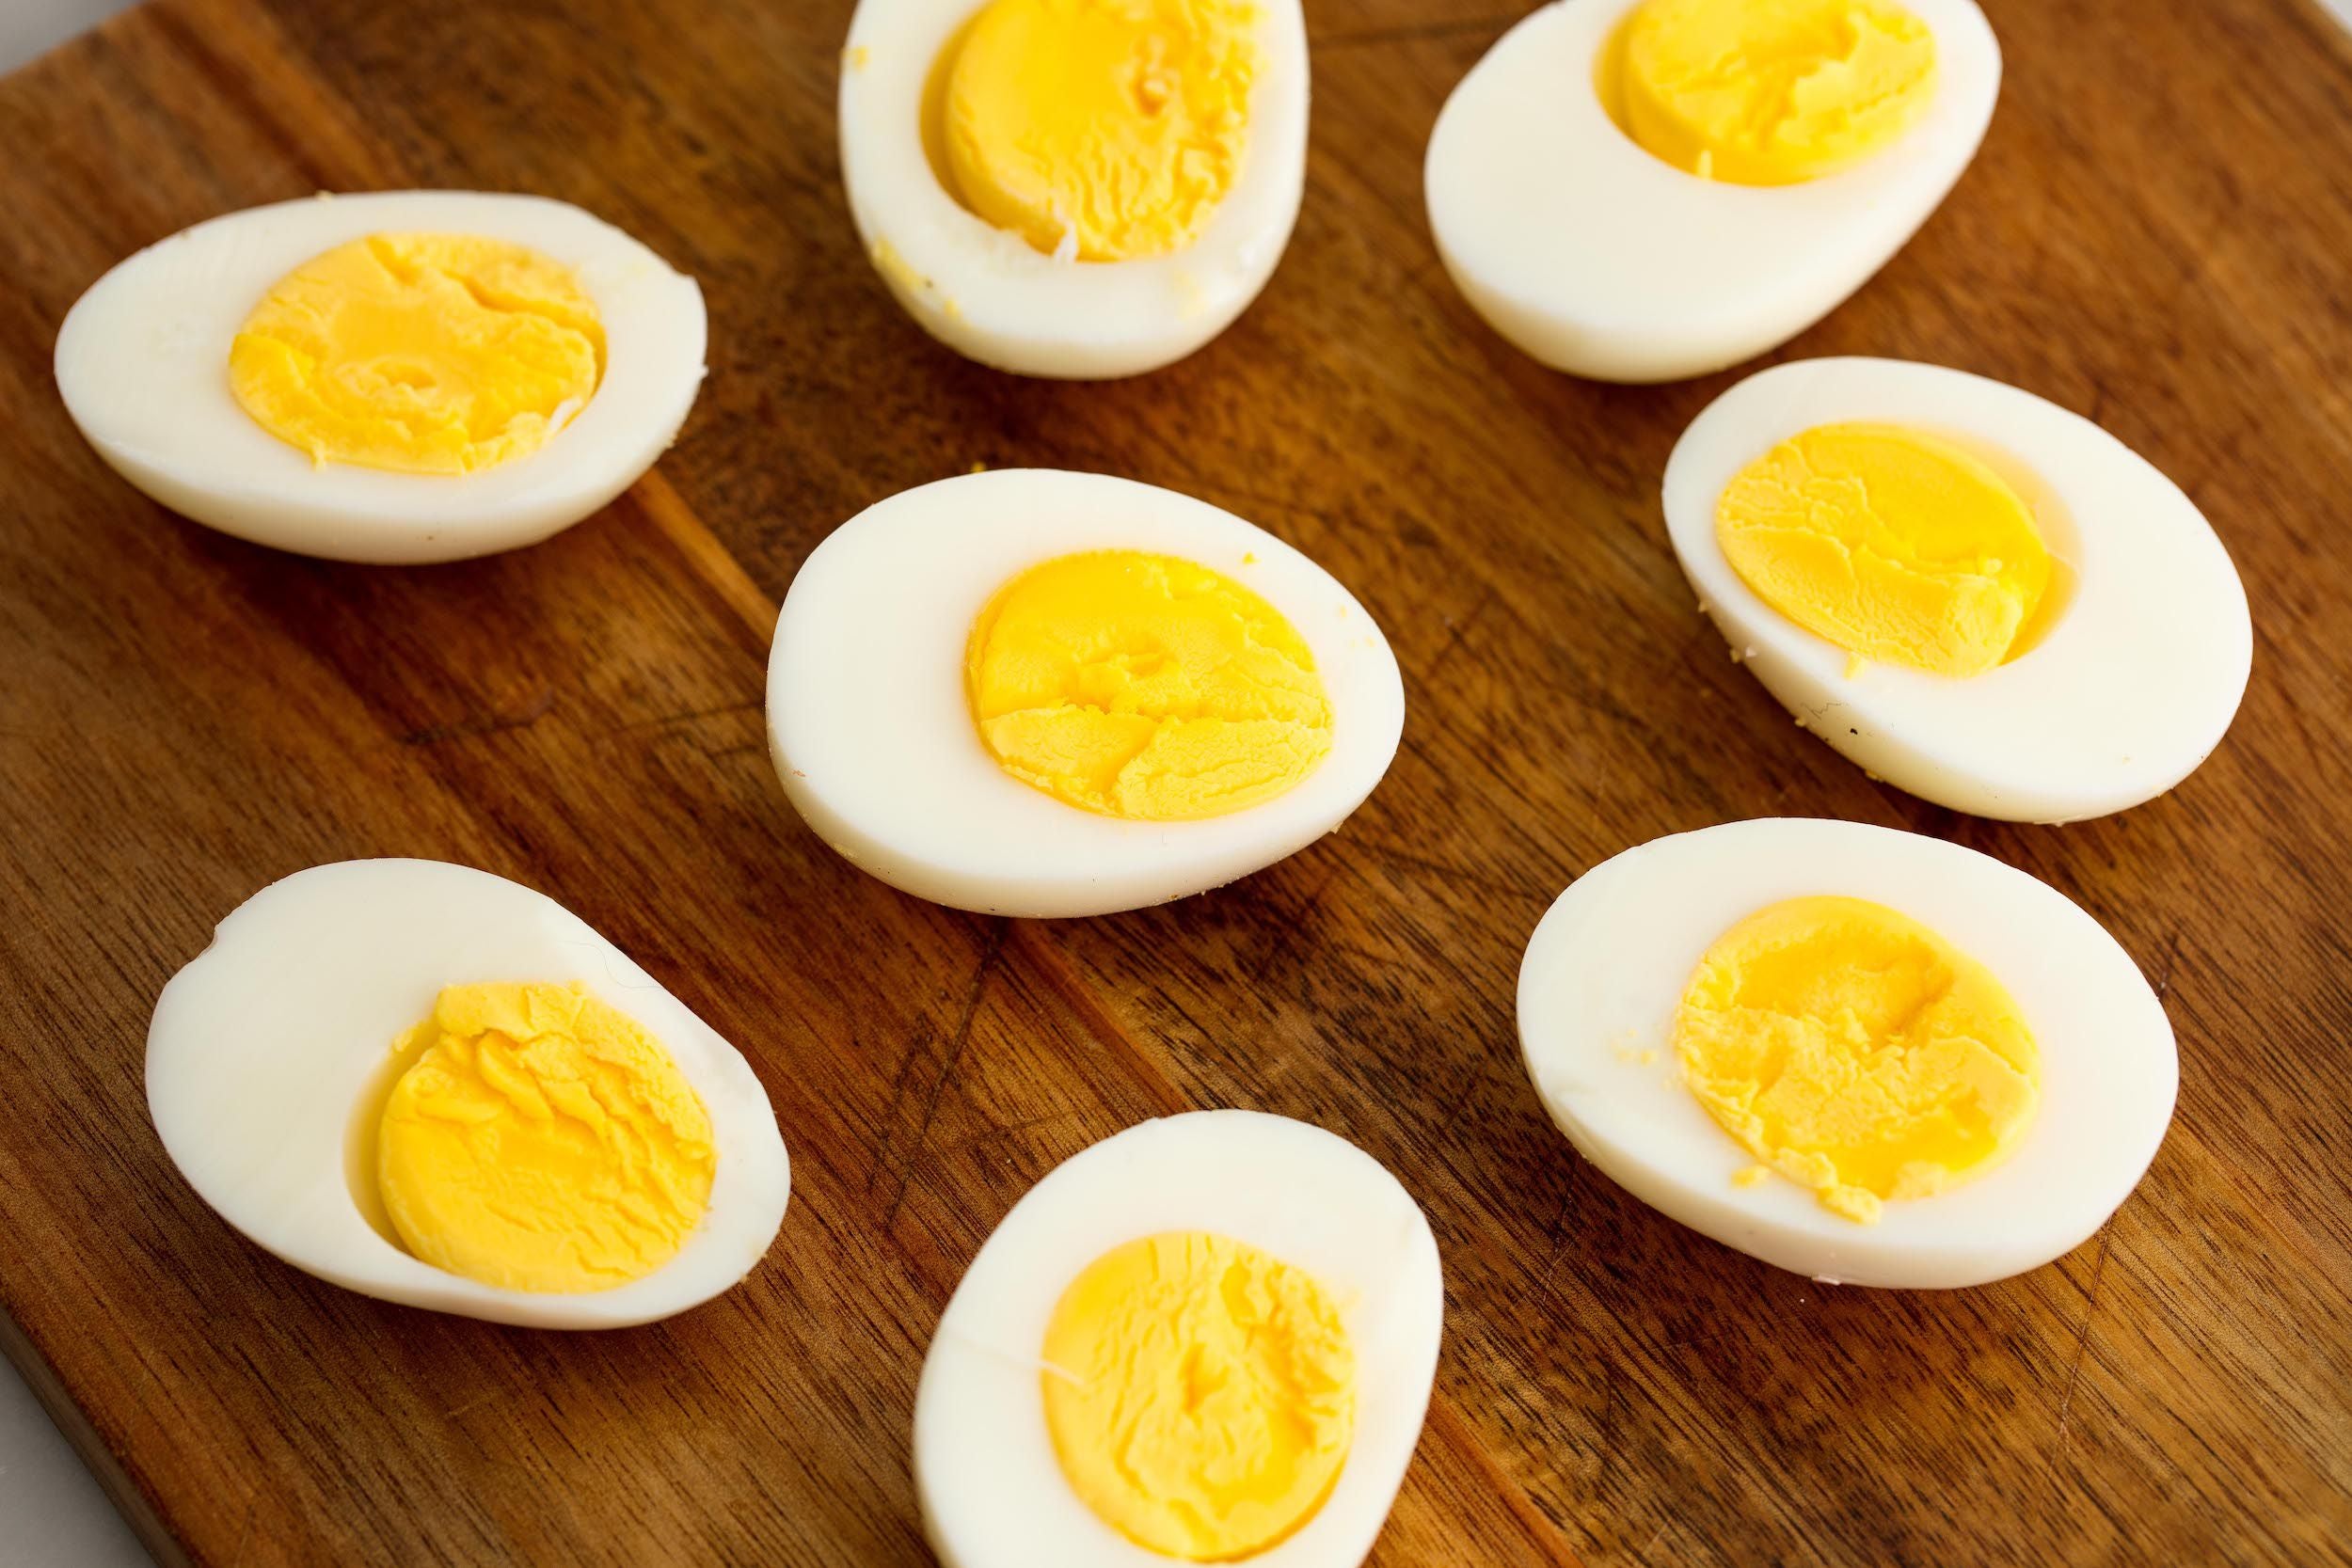 Interesting Facts About the Incredible, Edible Egg